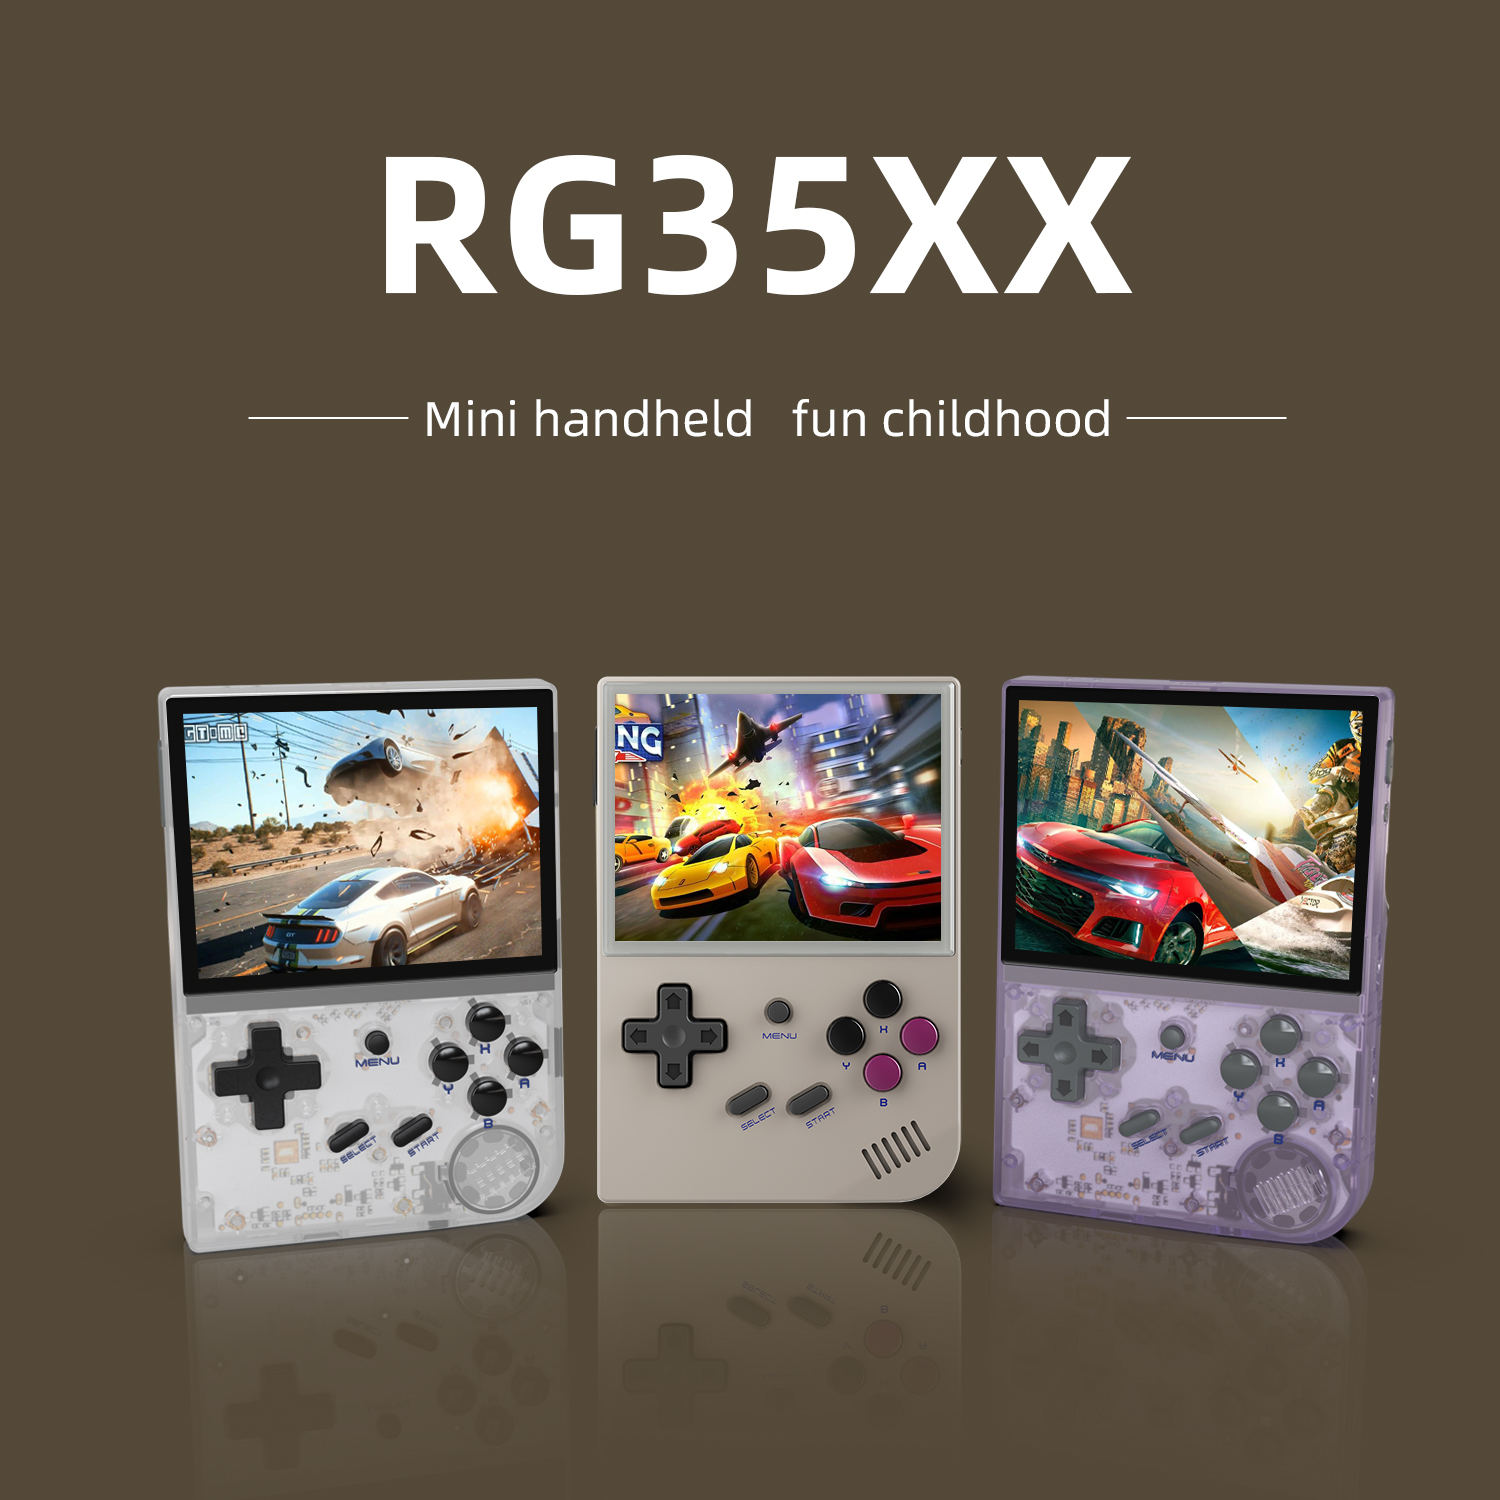 ANBERNIC RG35XX 64GB+128GB 8000 Games Retro Handheld Game Console Linux System 3.5 Inch IPS Screen Cortex-A9 Portable Pocket Video Player